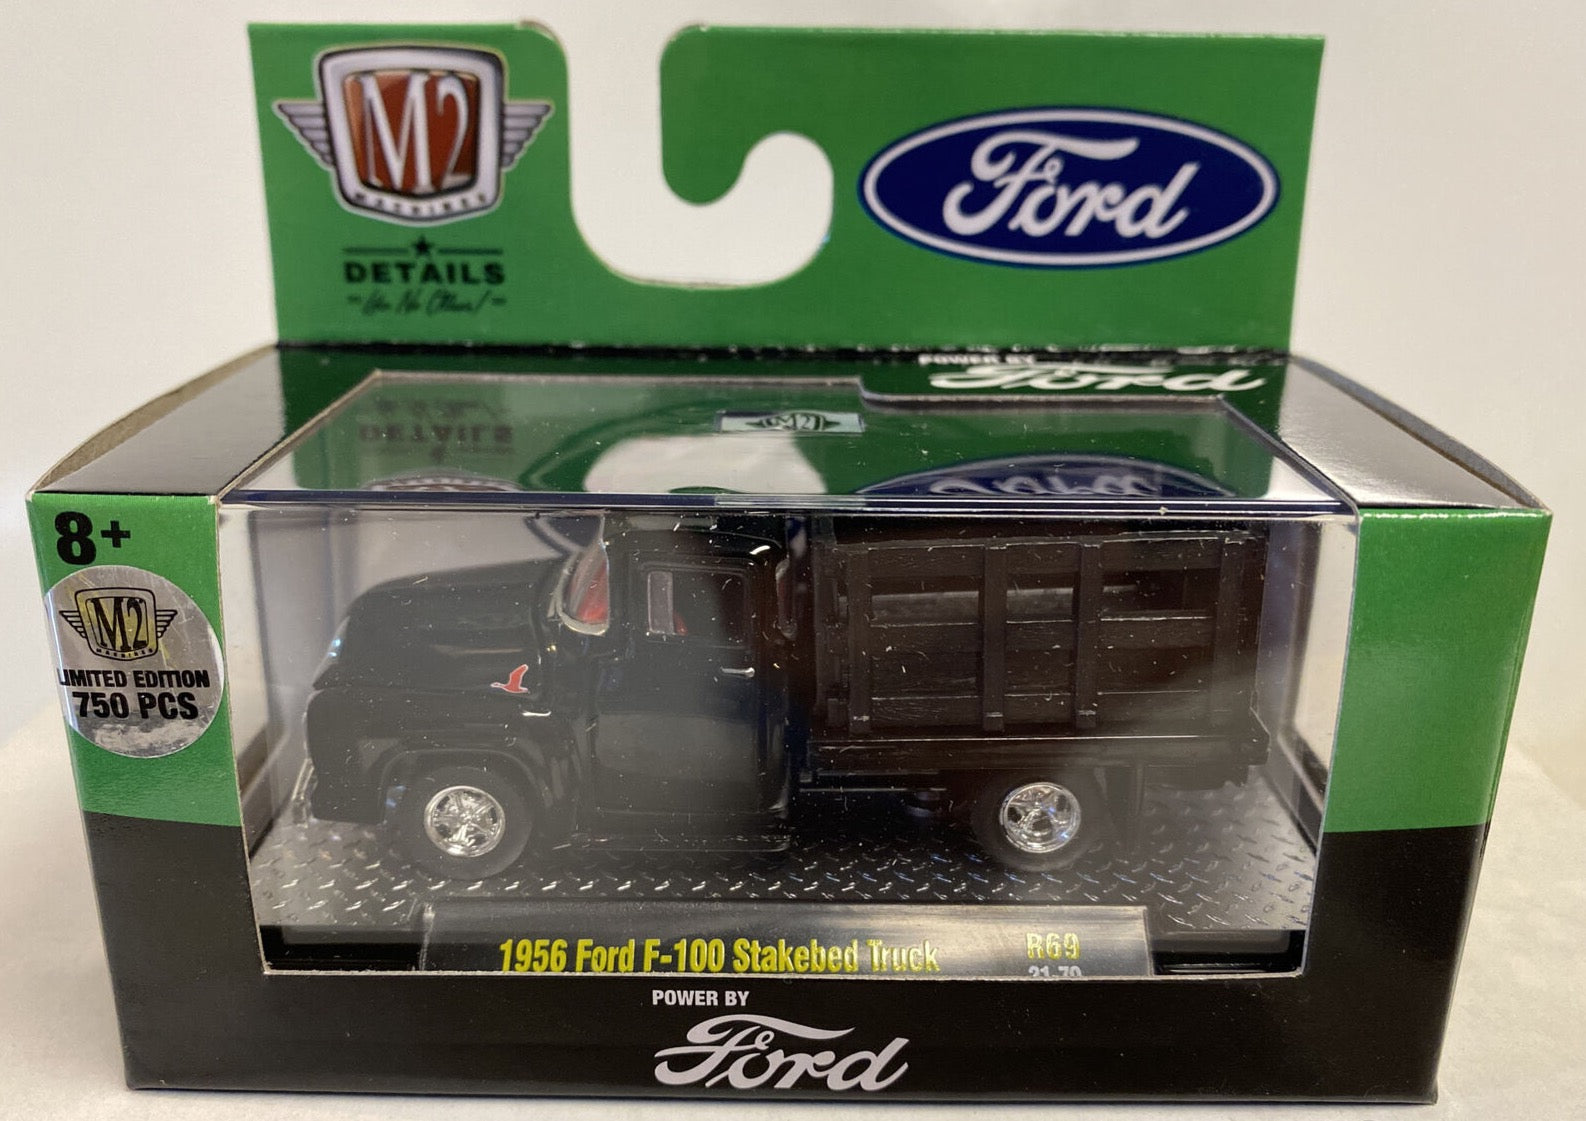 1/64 1956 FORD F-100 STAKEBED TRUCK "CHASE" 750 PCS